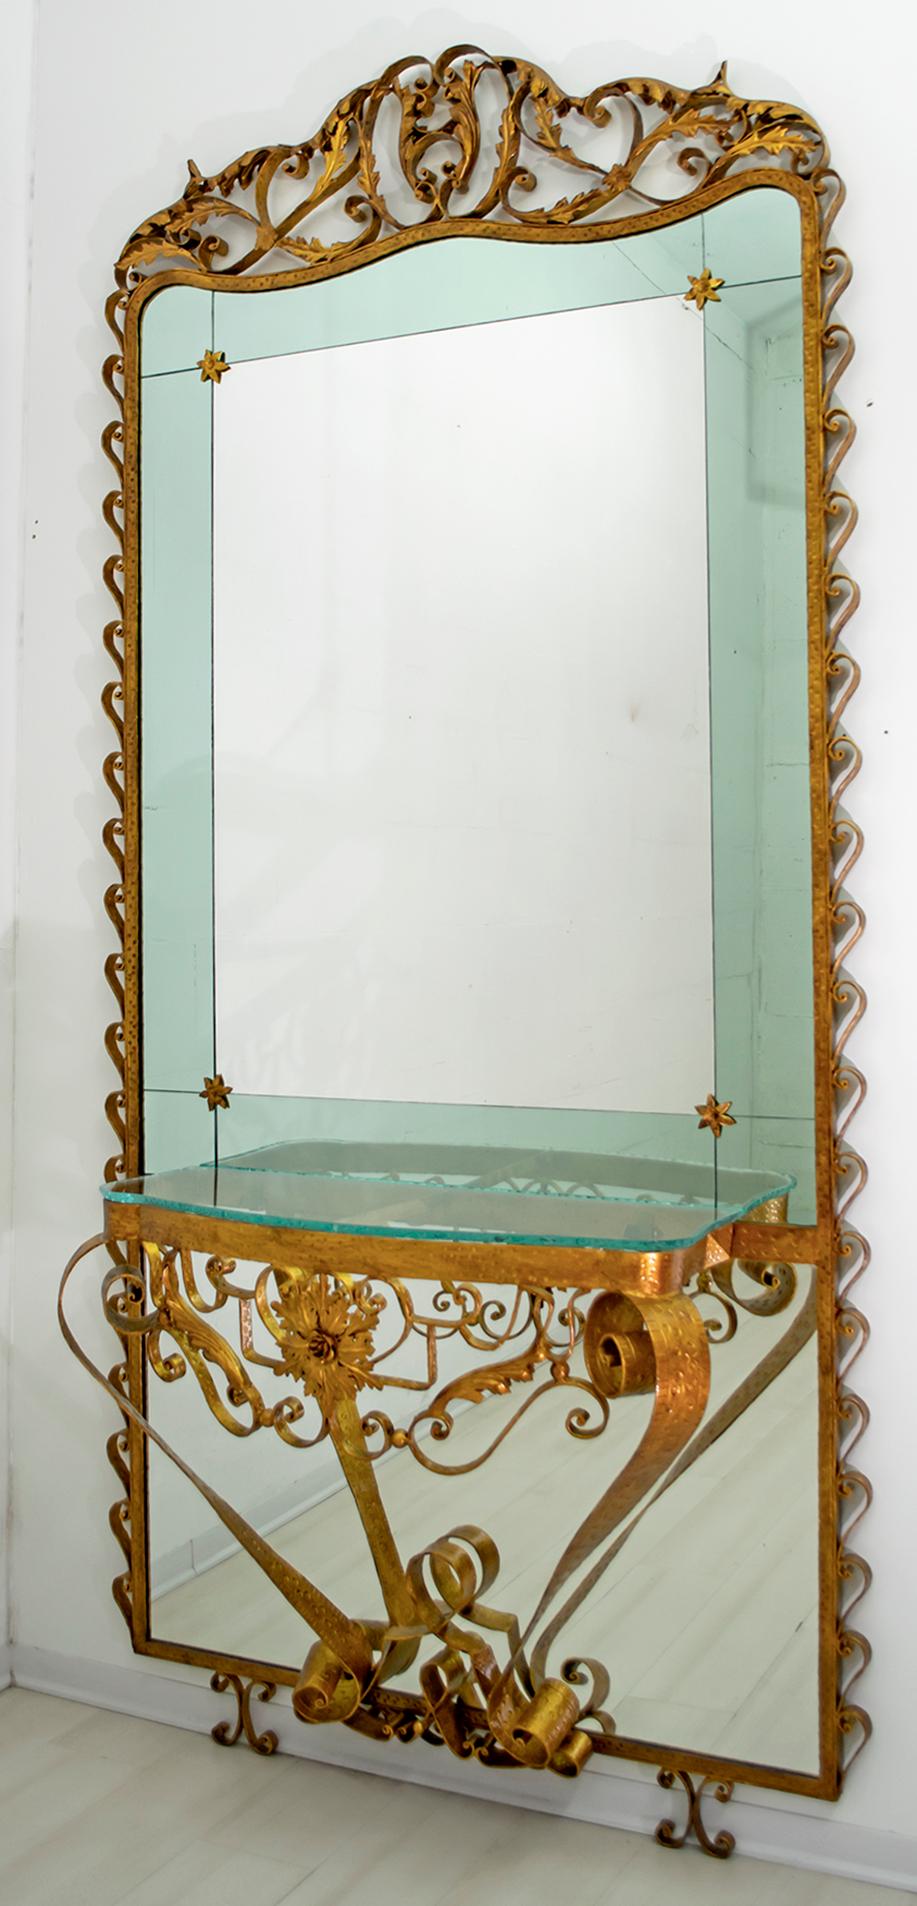 Beautiful, large and majestic entrance mirror with console, sophisticated, elegant, designed by Pier Luigi Colli, Italy, Turin 1950
The frame is in wrought iron, handcrafted, the mirror is in two colors, green and transparent, the console tabletop,